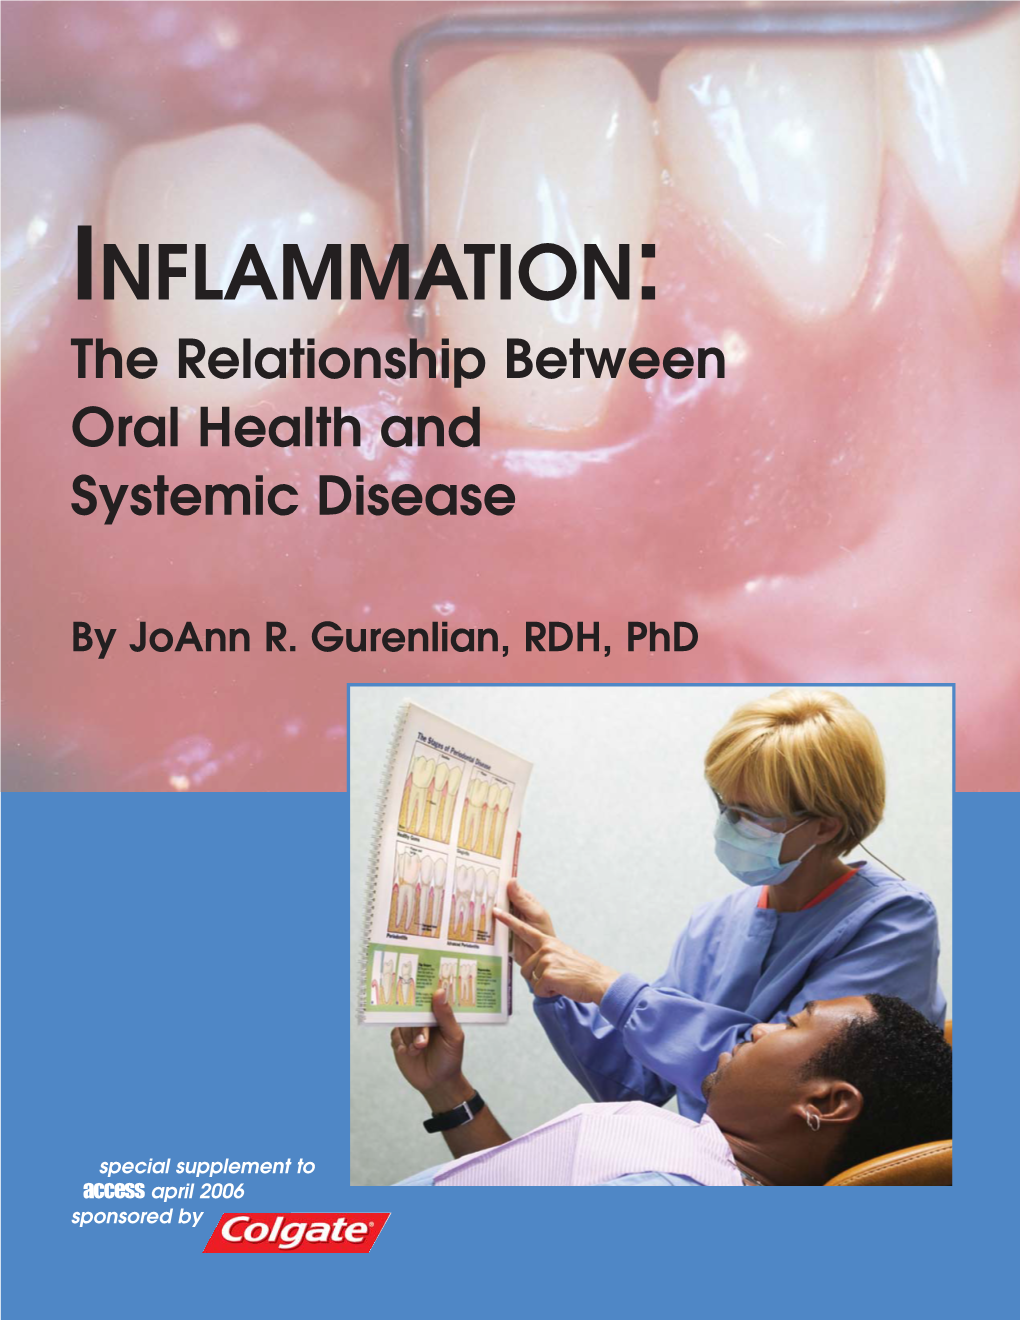 Inflammation: Relationship Between Oral Health and Systemic Disease